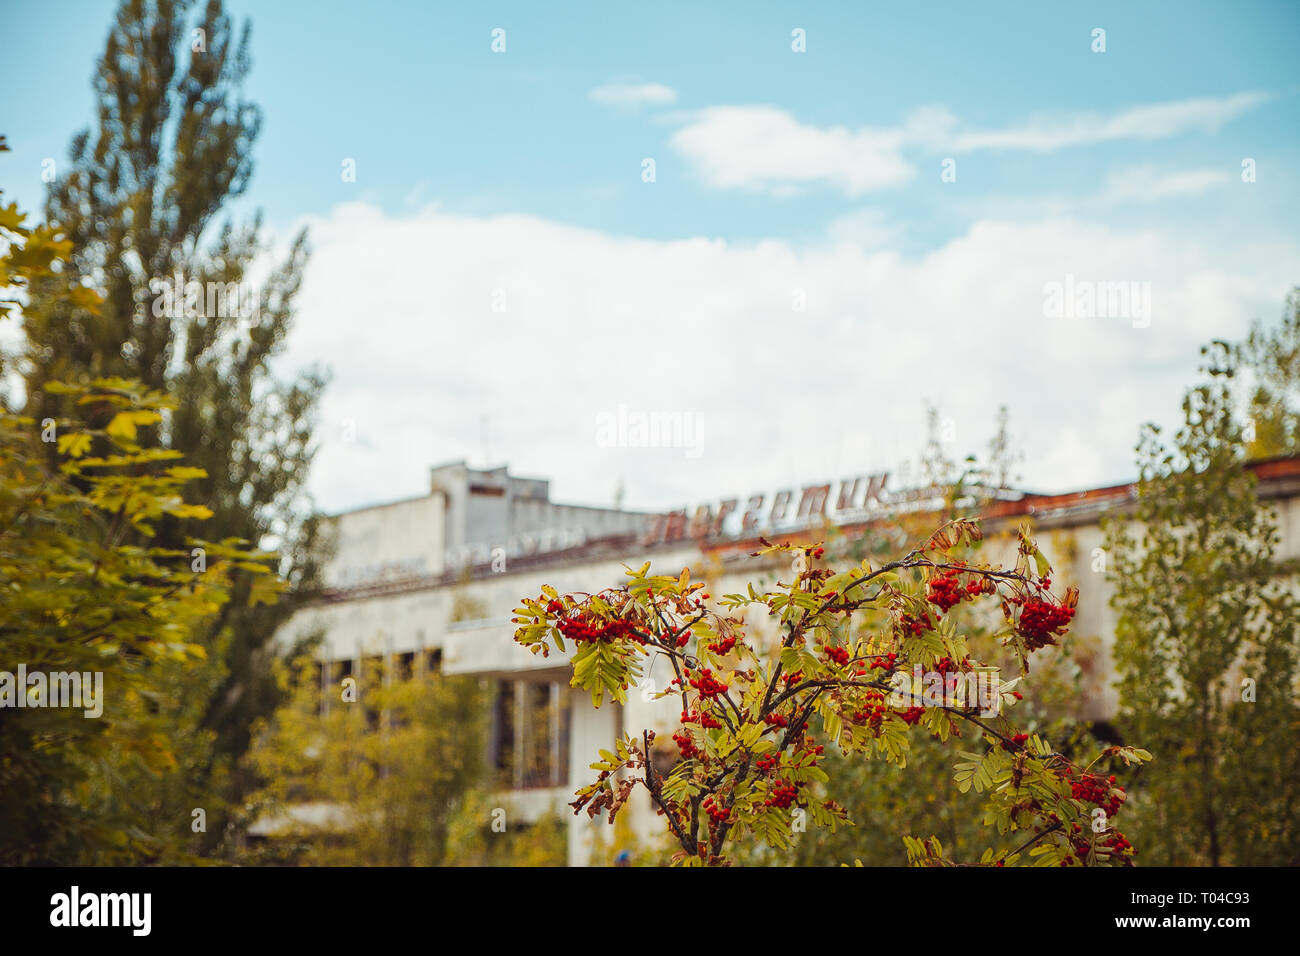 Palace of Culture Energetic in Chornobyl exclusion zone. Radioactive zone in Pripyat city - abandoned ghost town. Chernobyl history of catastrophe Stock Photo